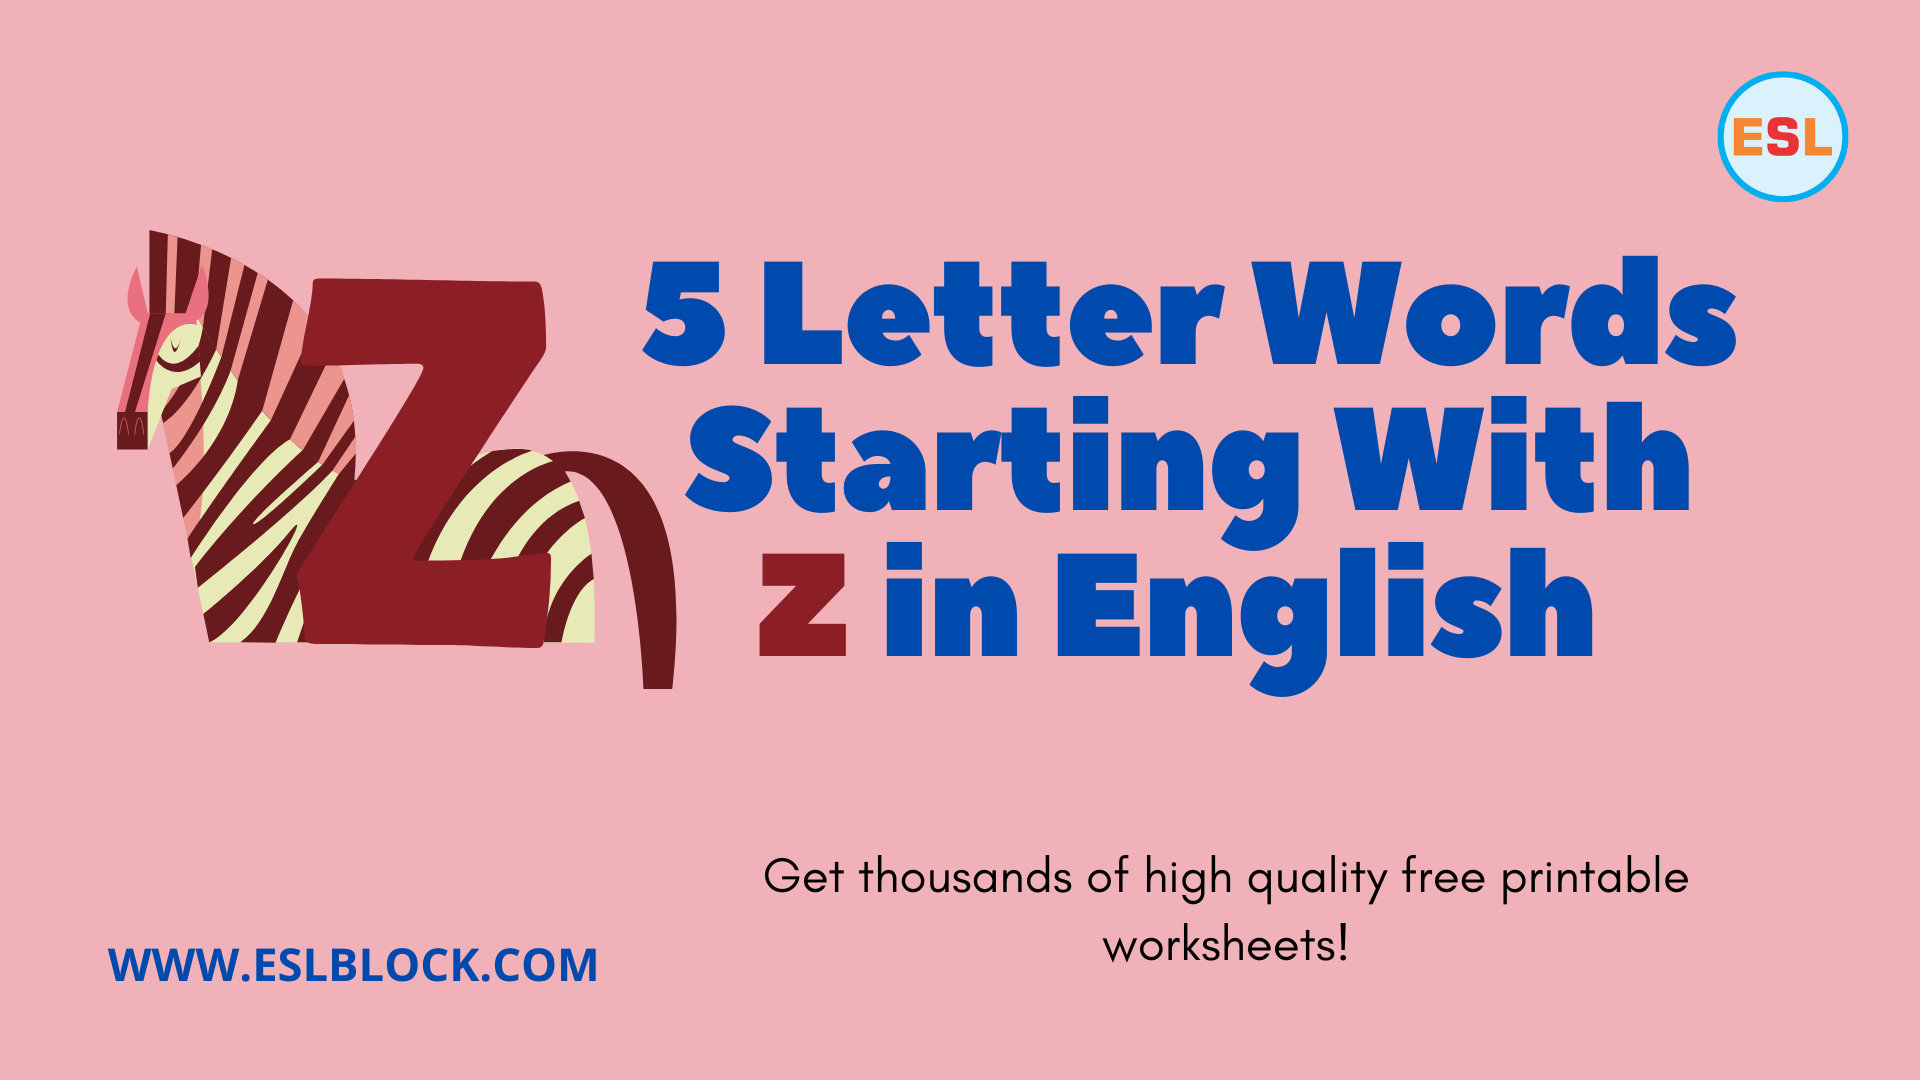 5 Letter Words, 5 Letter Words Starting With Z, 5 Letter Words That Start With Z, 5 Letter Words With Z, 5 Letter Z Words, English, English Grammar, English Vocabulary, English Words, List of 5 Letter Words, Vocabulary, Words That Start With Z, Z Words